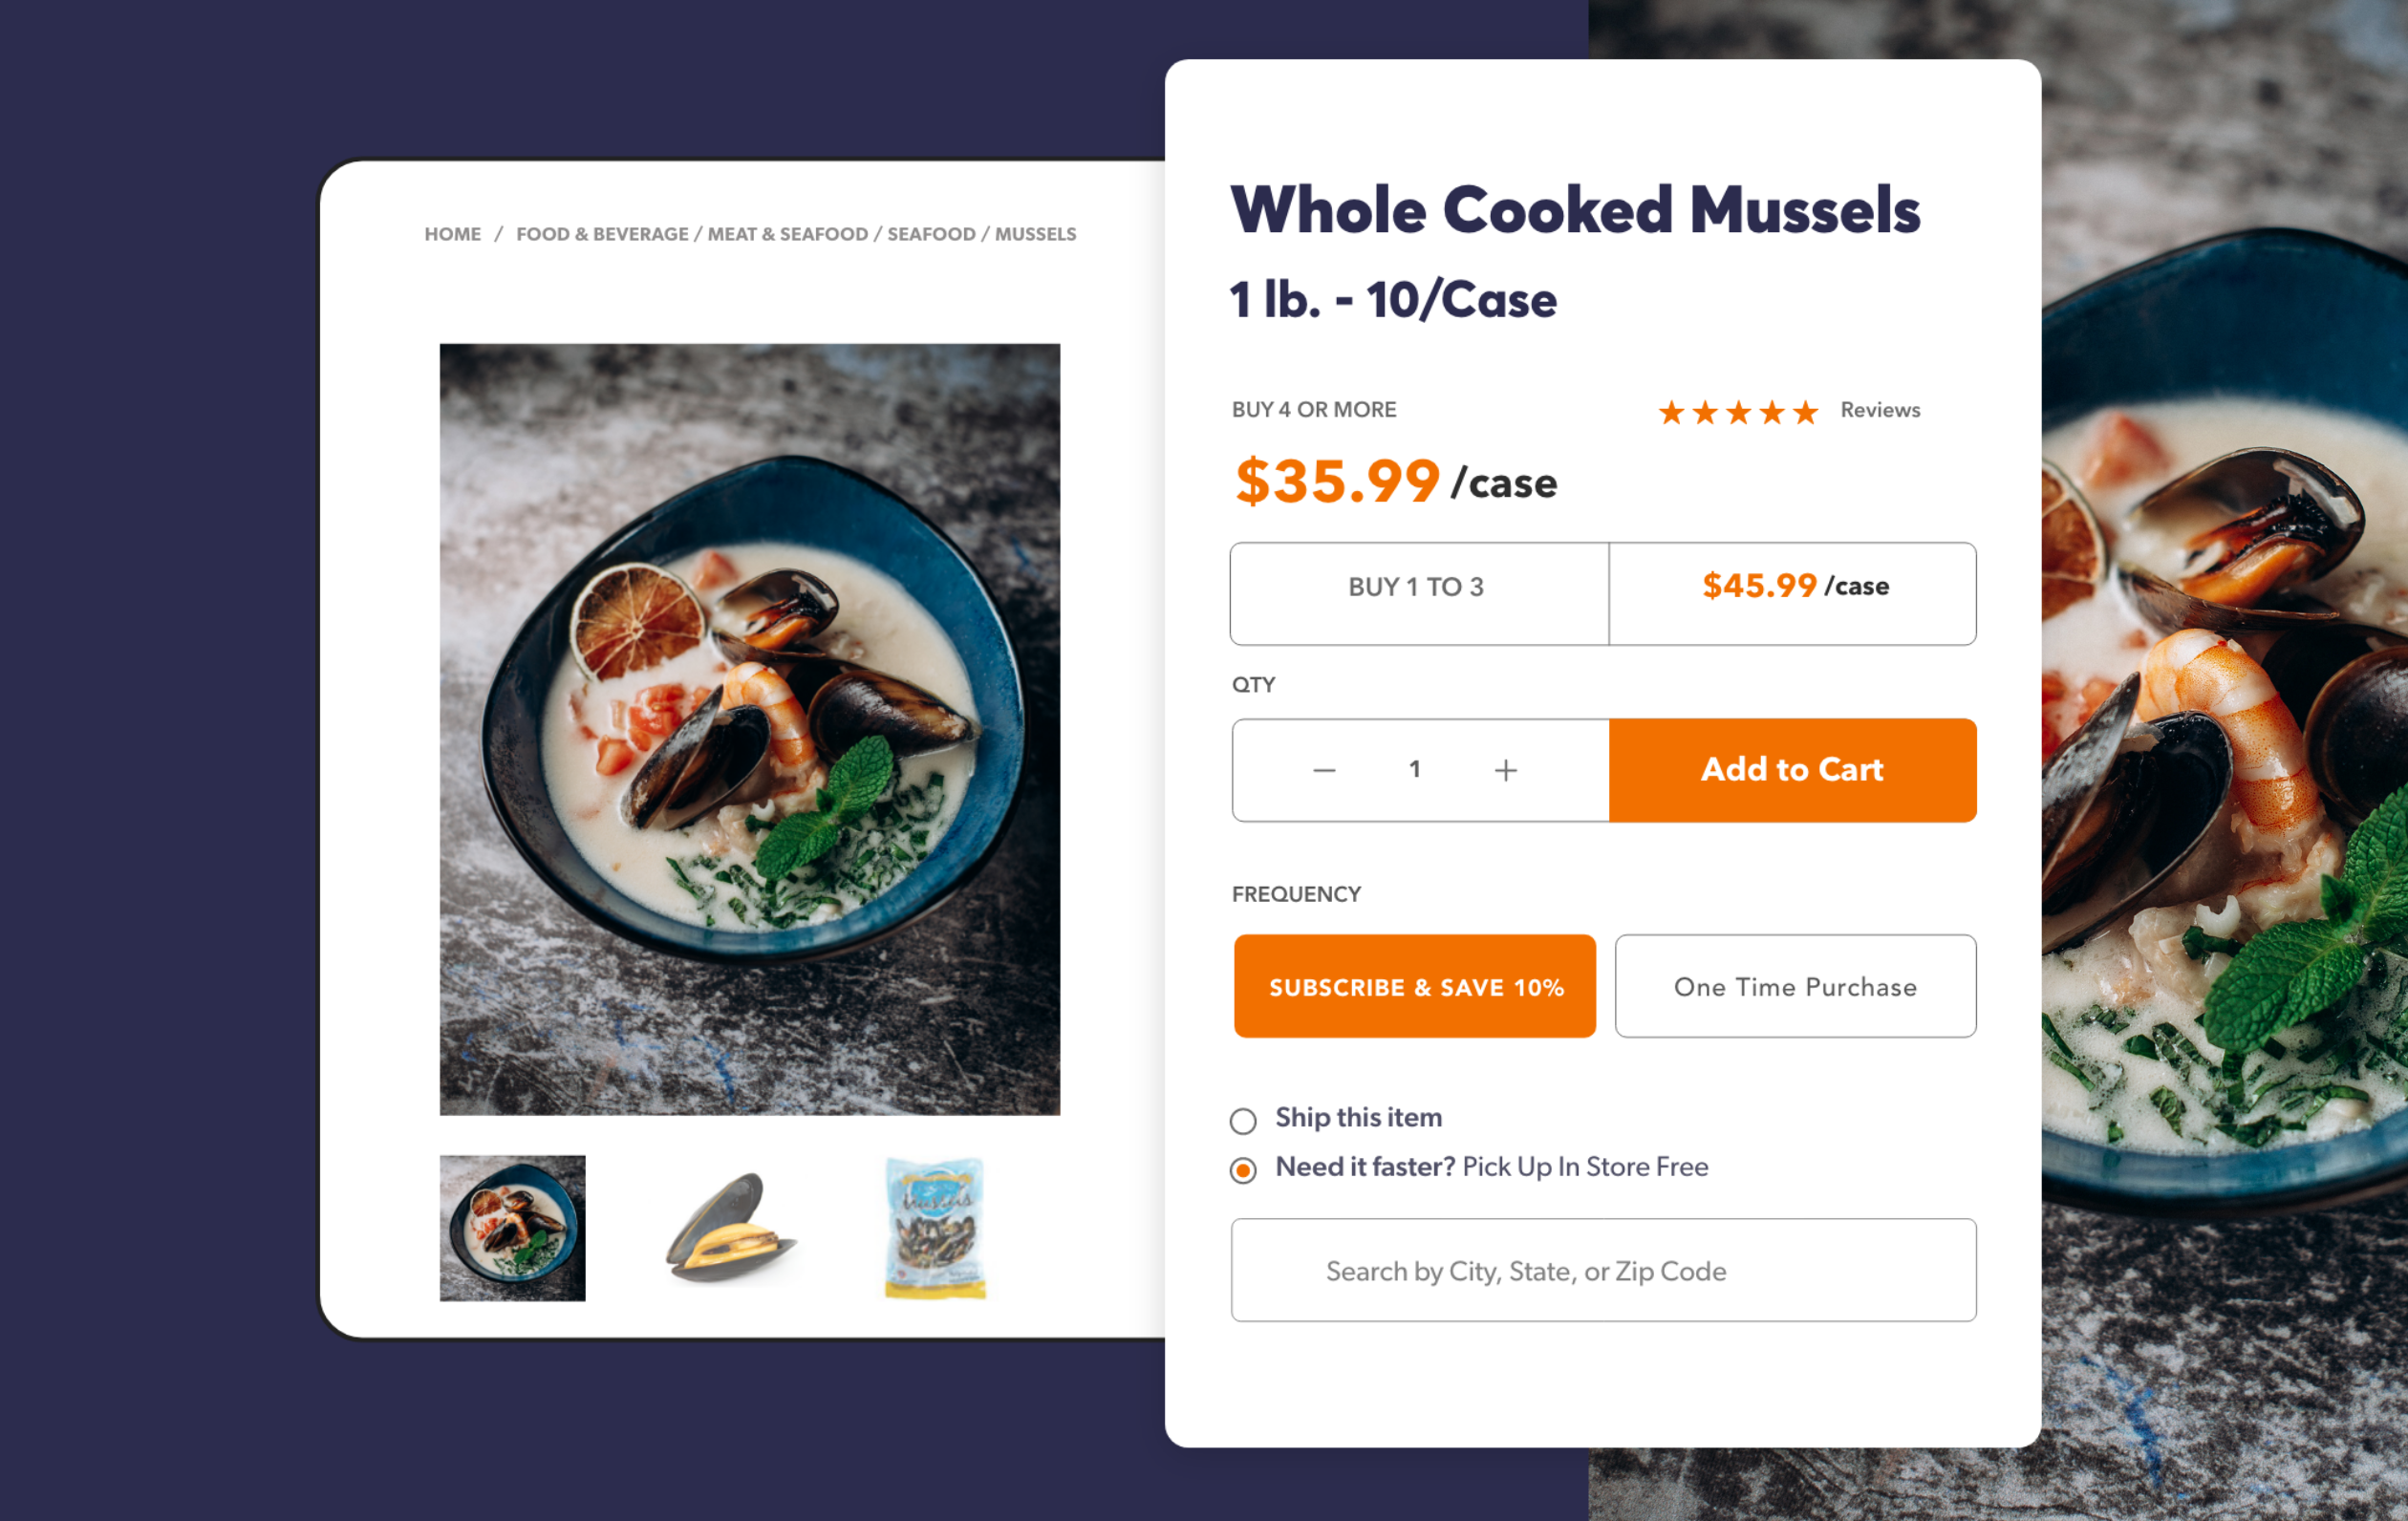 An ecommerce product page featuring whole cooked mussels for sale.